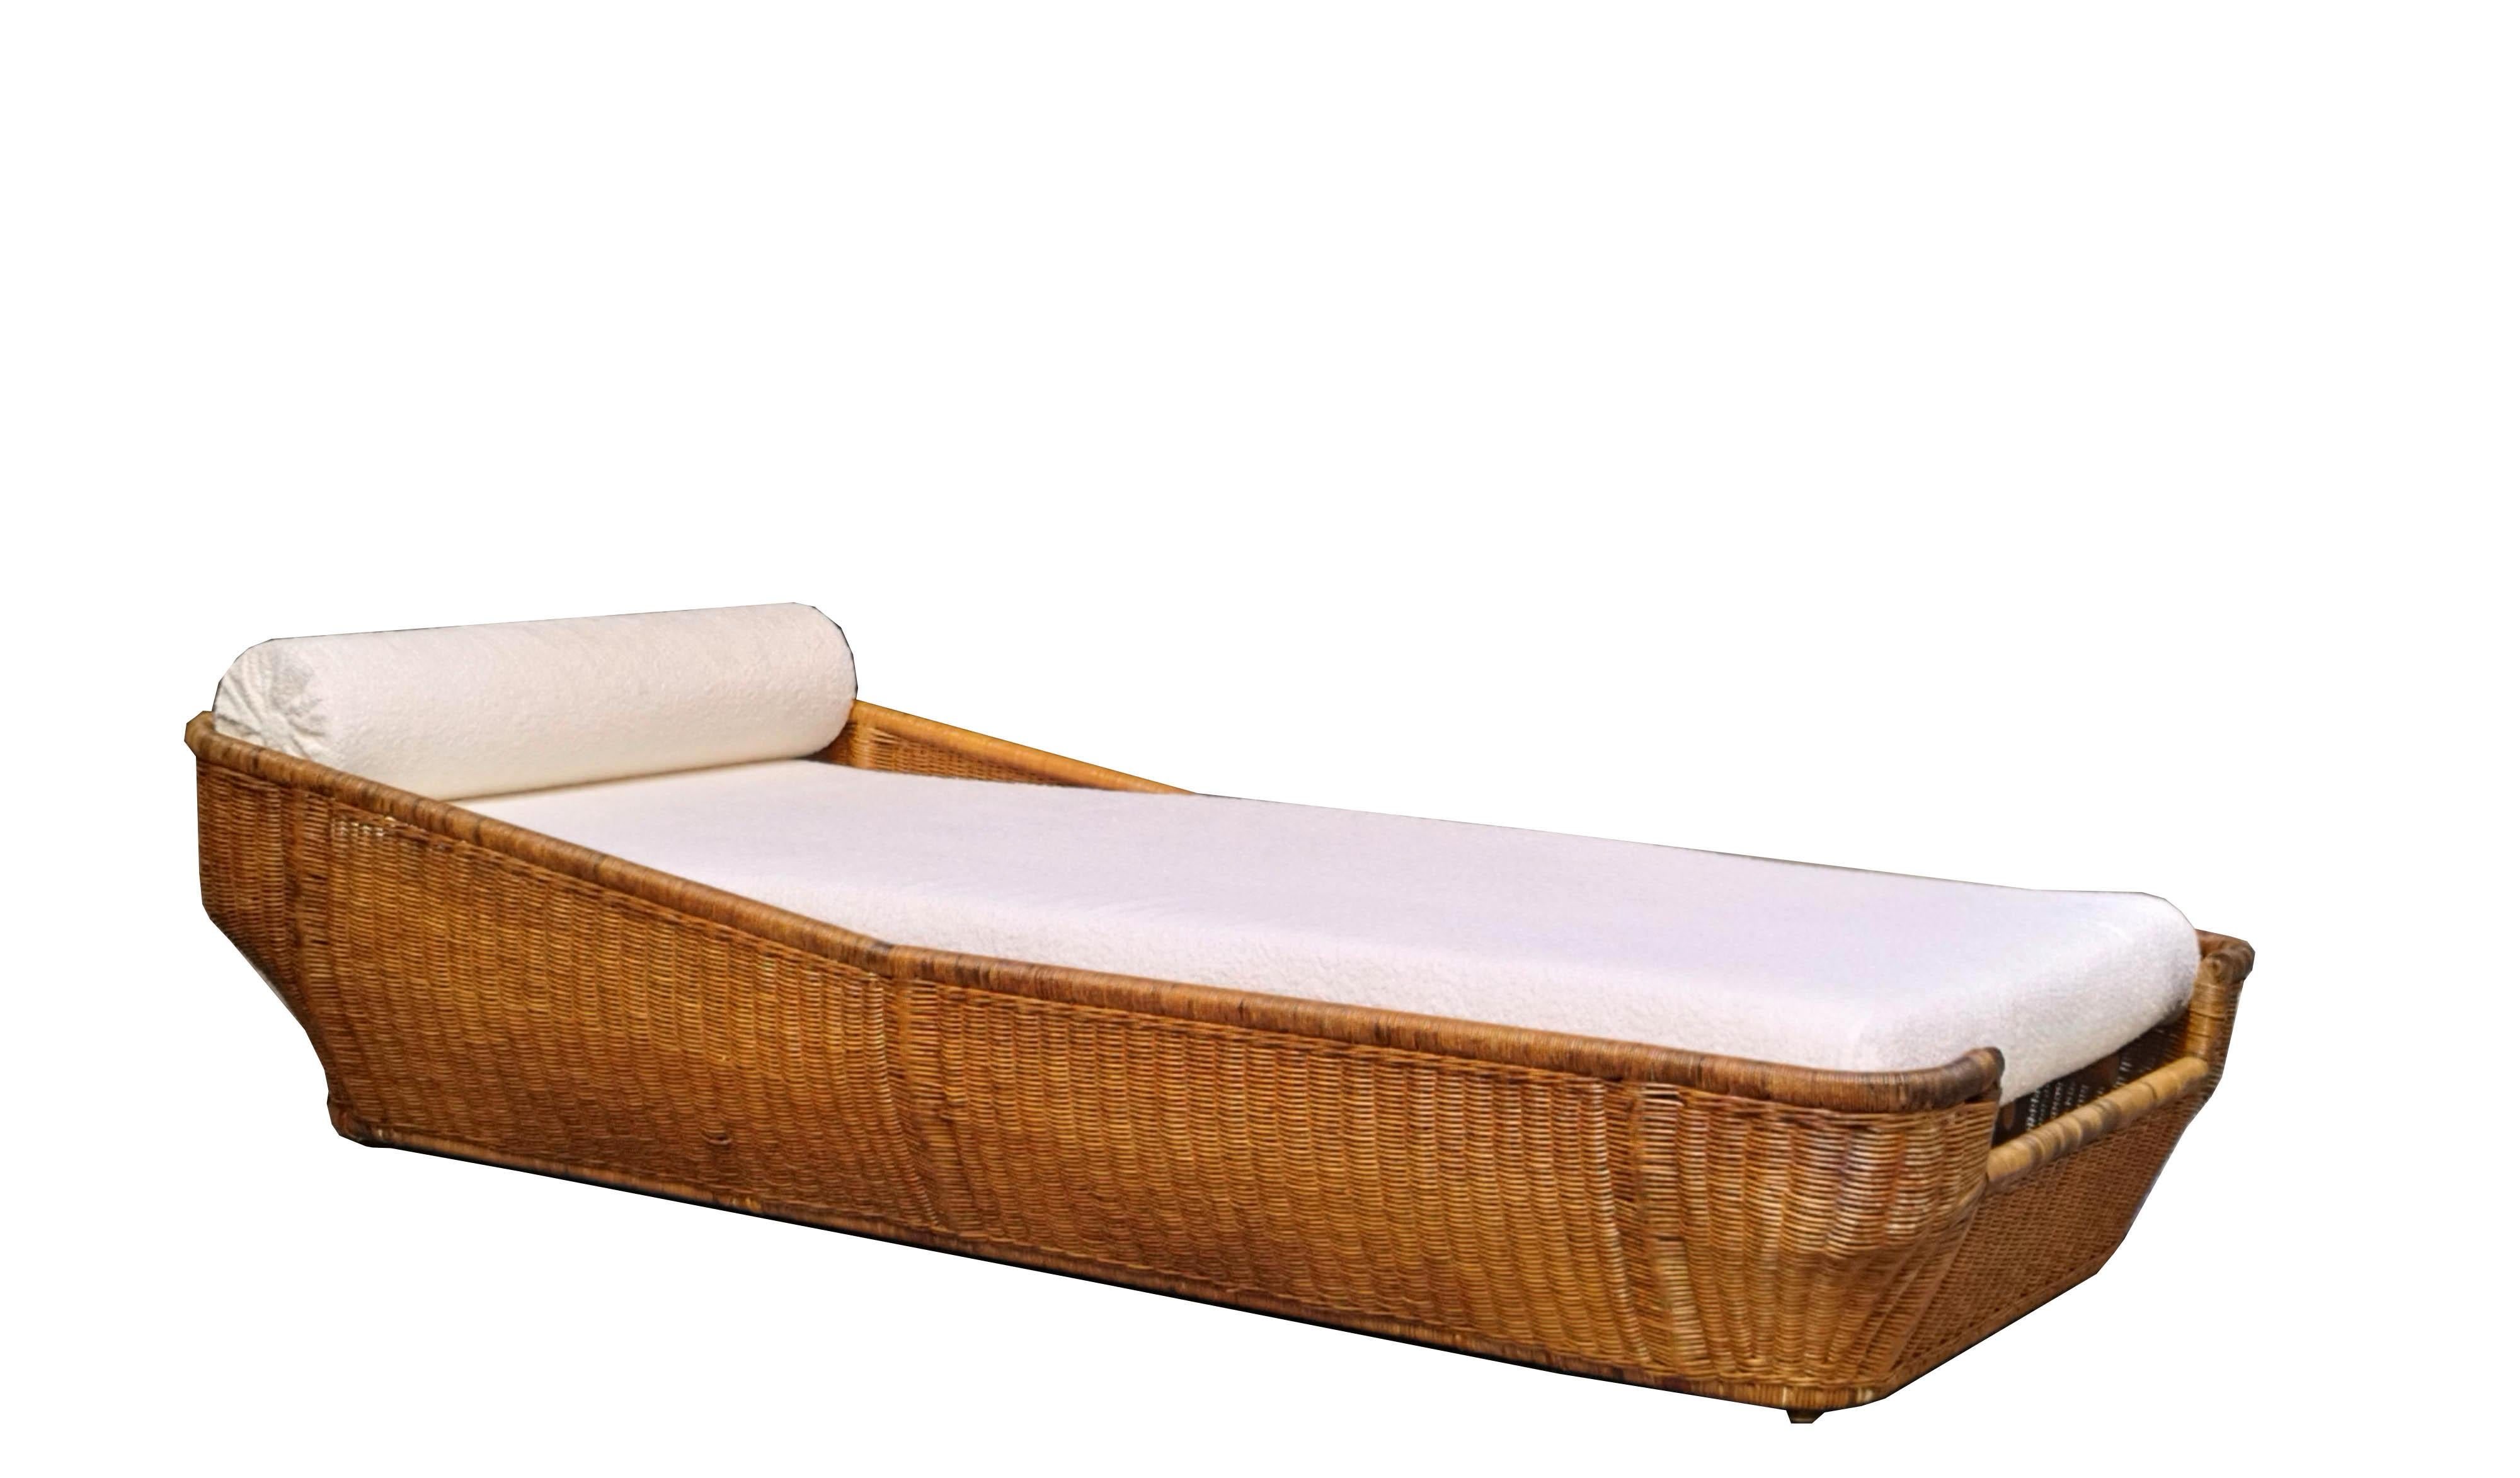 Chaise longue or daybed in woven wicker and white boucle' fabric cover by Vivai del Sud, Italy 1960. This daybed has a fantastic shape and is completely made of rattan